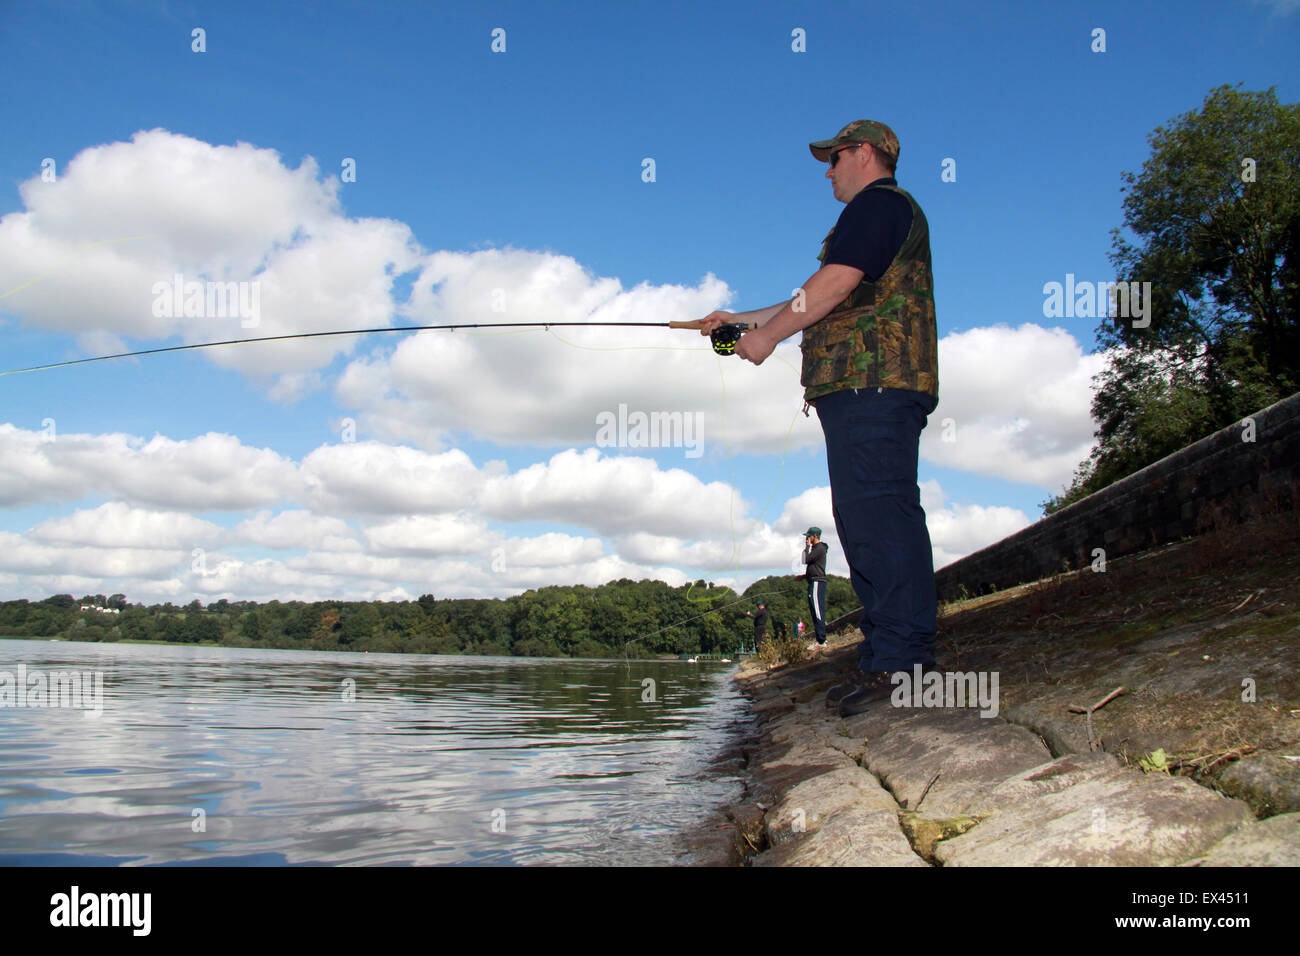 Fly fishing from reservoir dam with blue sky and clouds Stock Photo